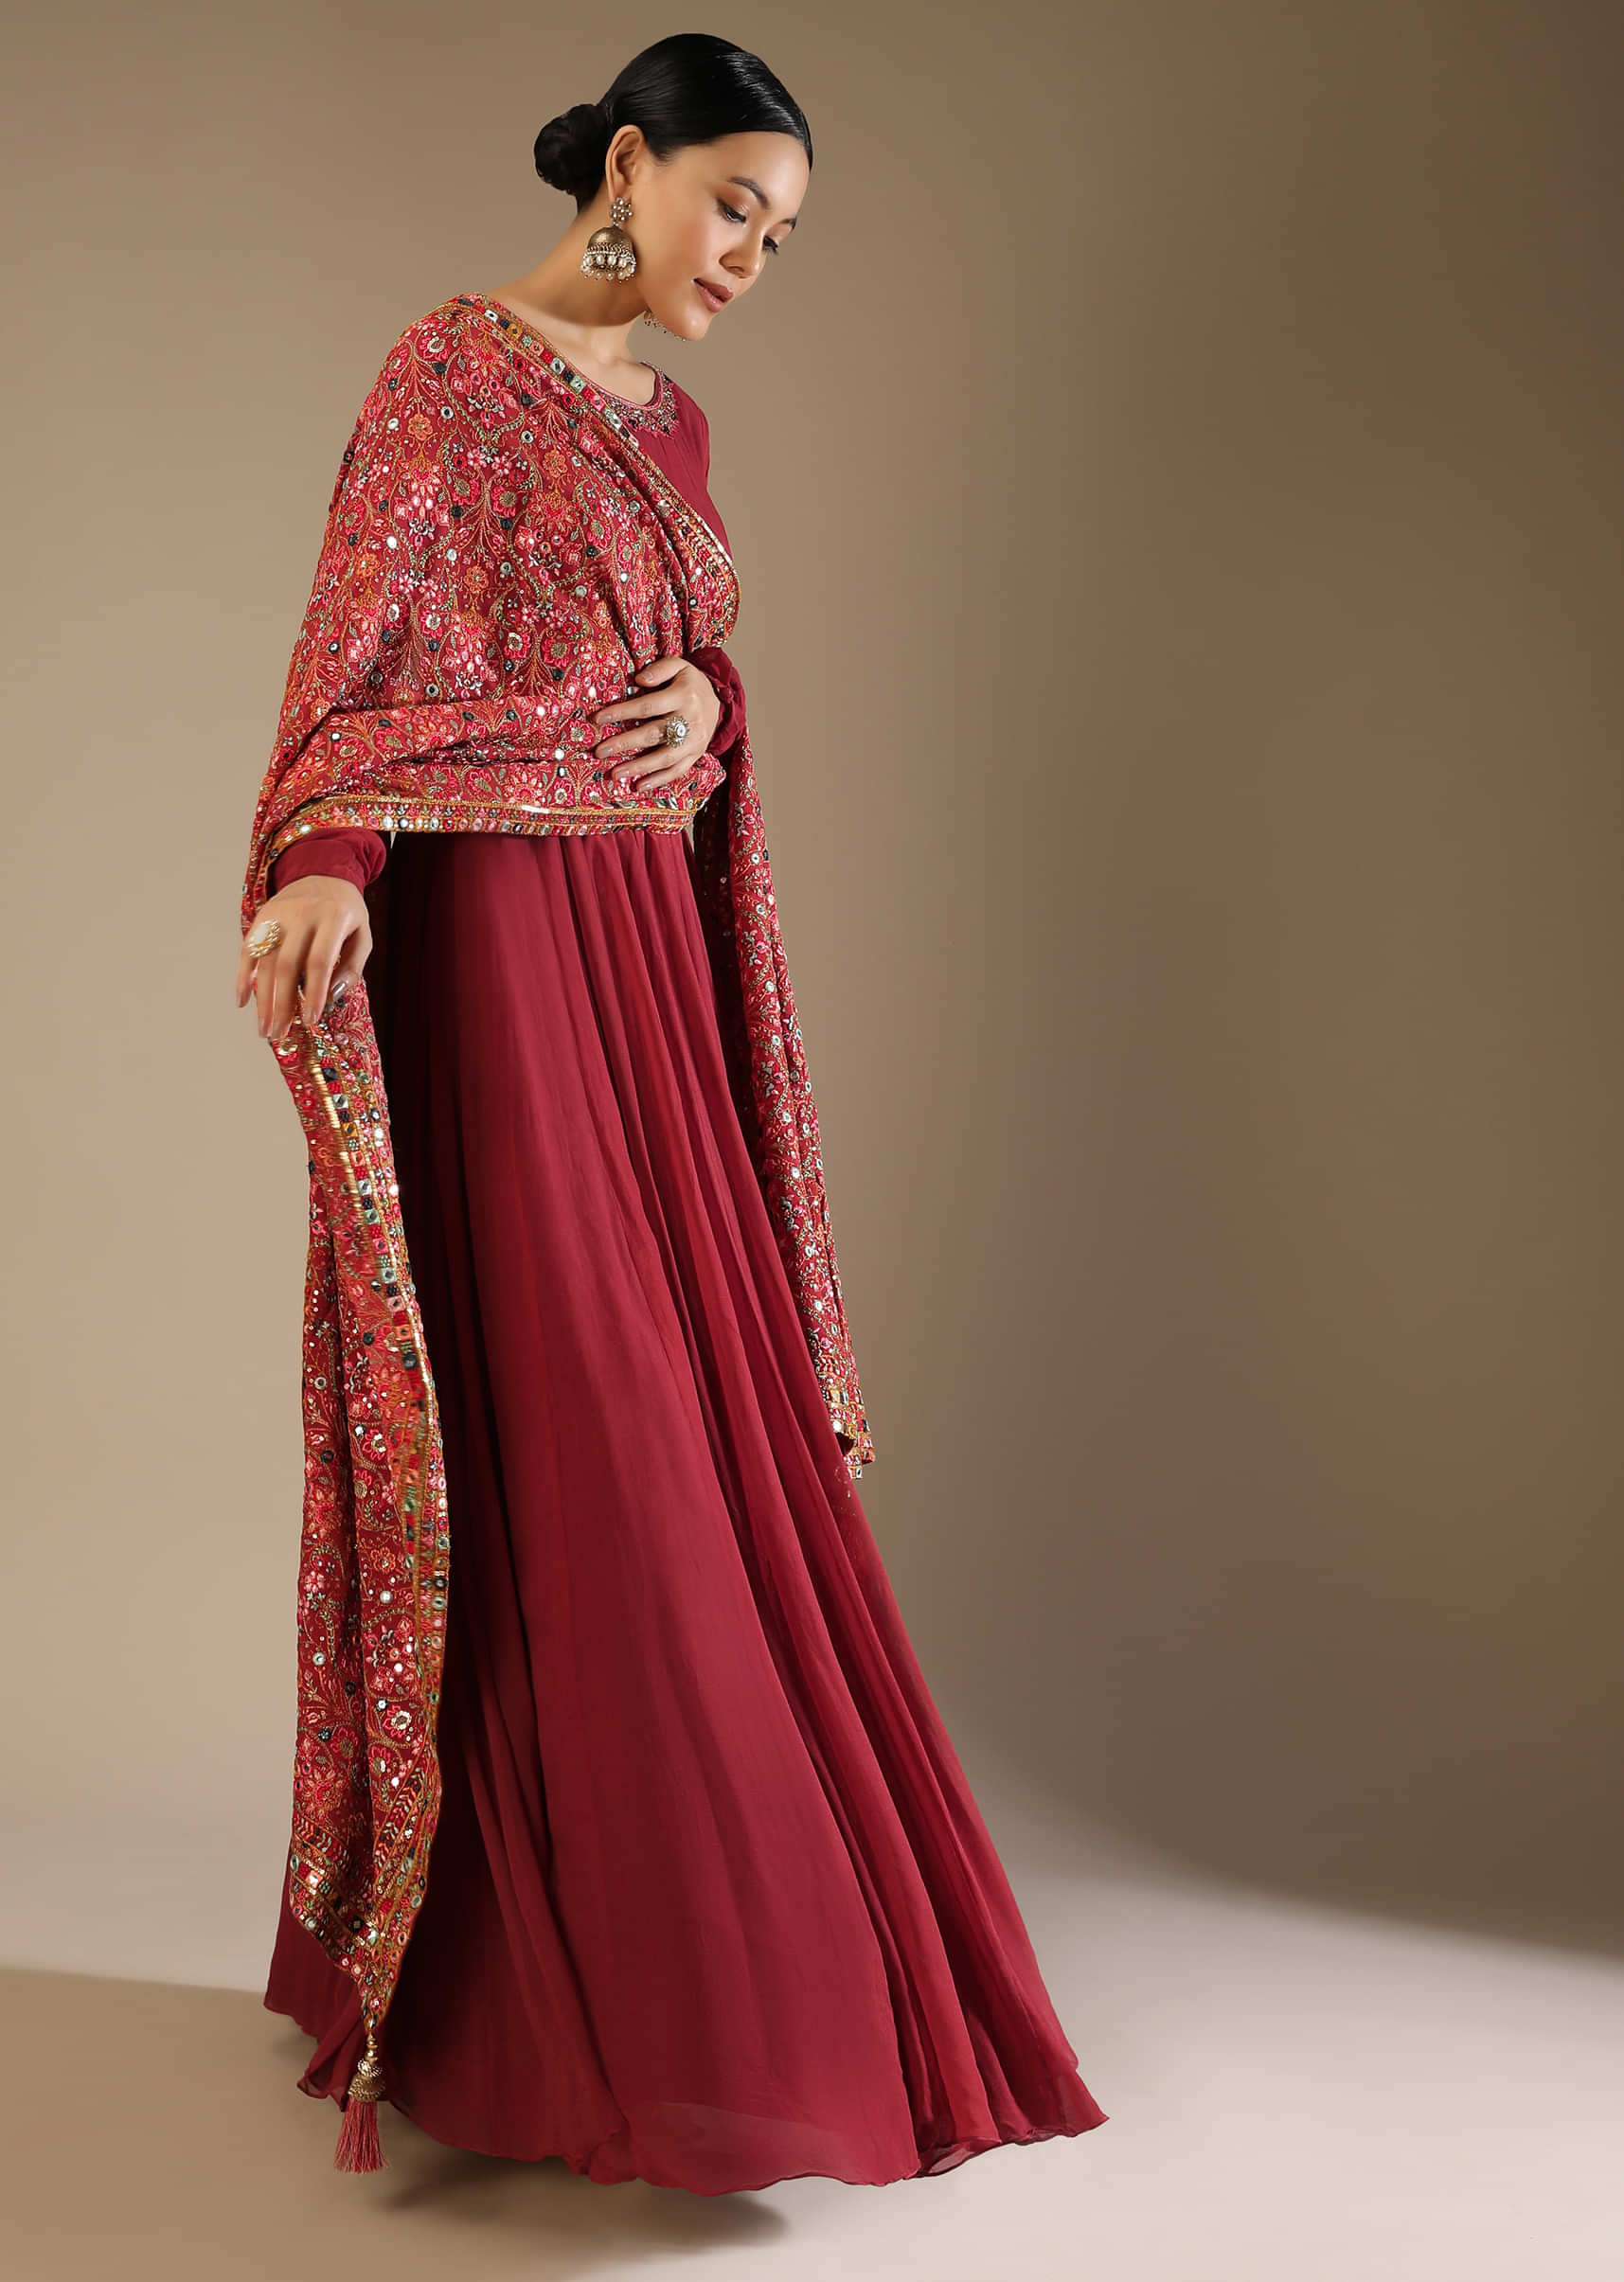 Scarlet Red Anarkali Suit In Georgette With A Multi Colored Resham And Abla Embroidered Floral Jaal On The Dupatta